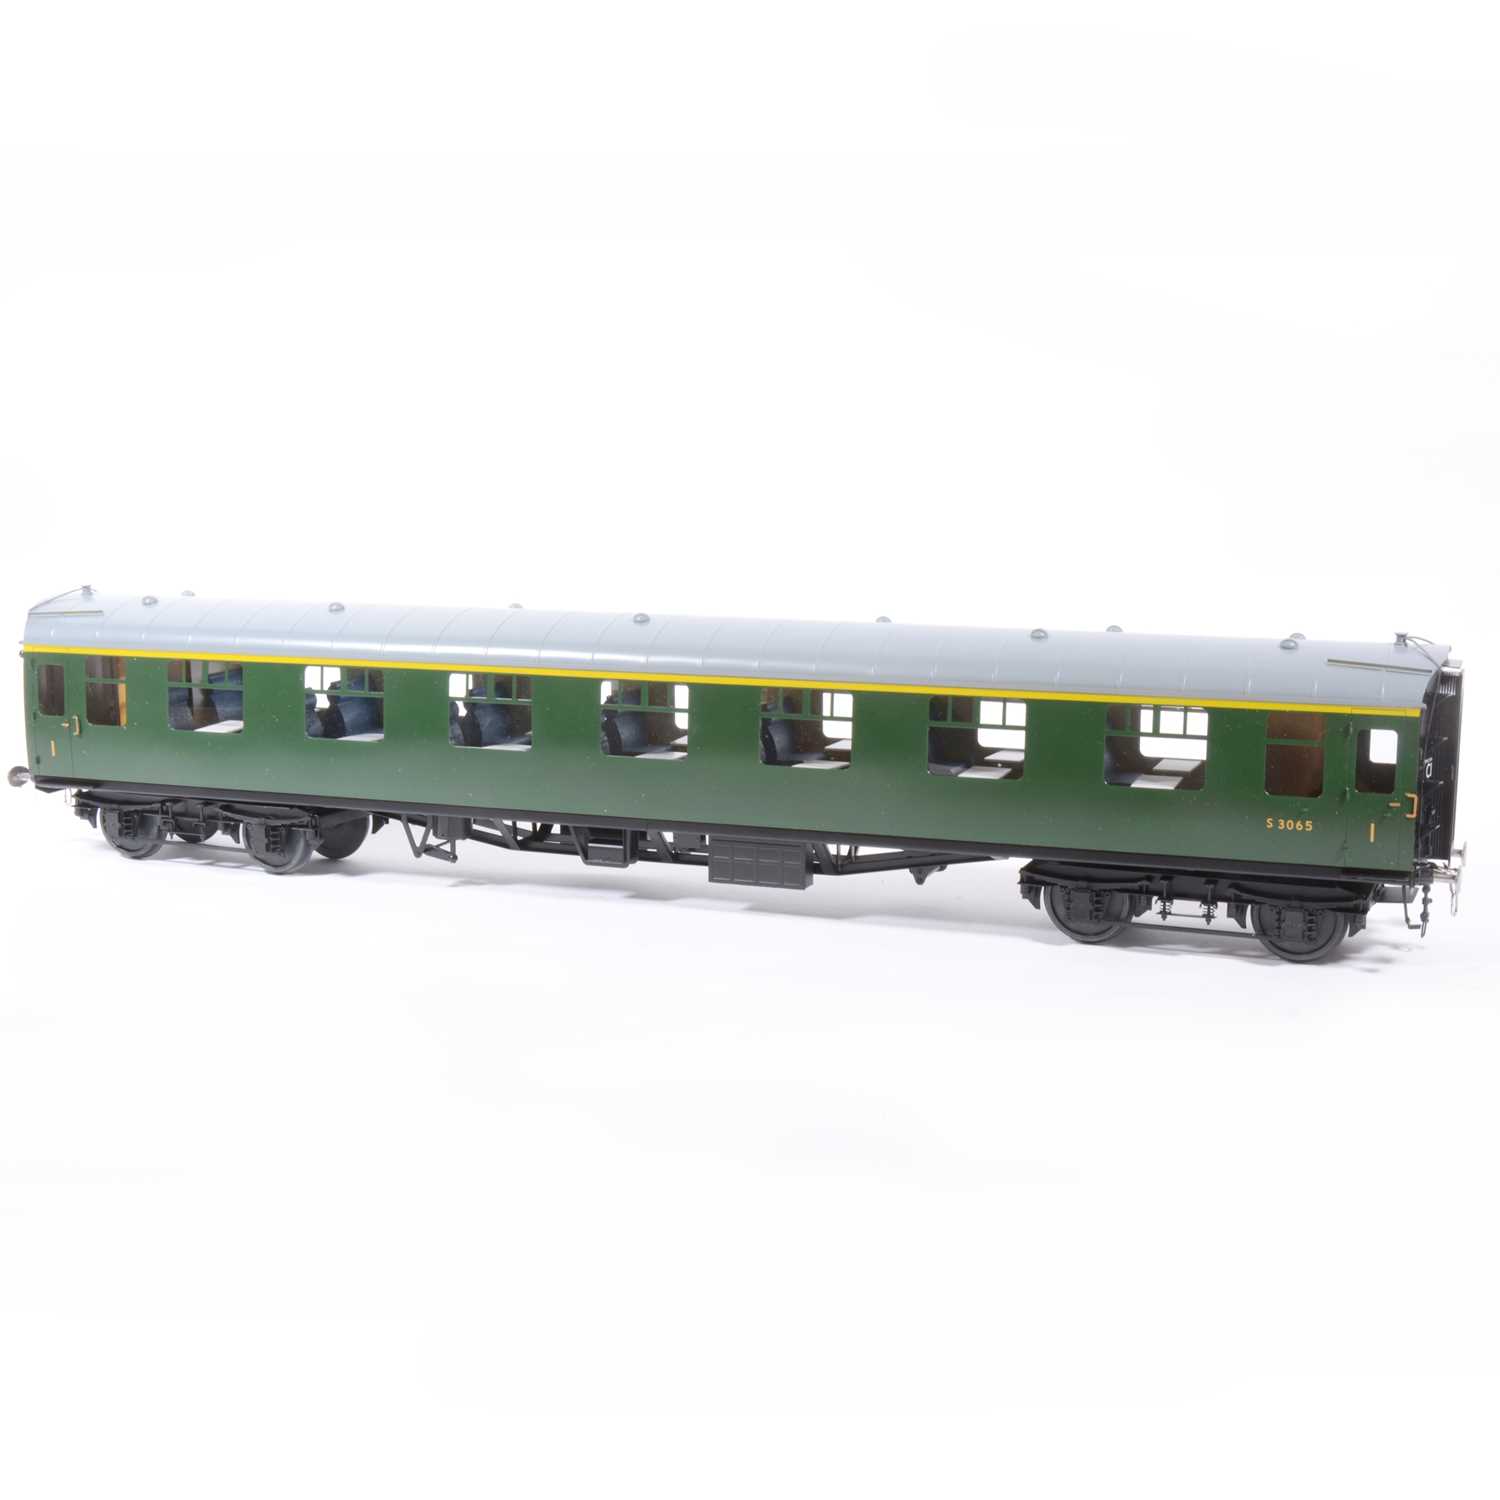 Lot 68 - Tower Brass Models, gauge 1 / G scale, 45mm passenger coach, BR green no.S3065, boxed.